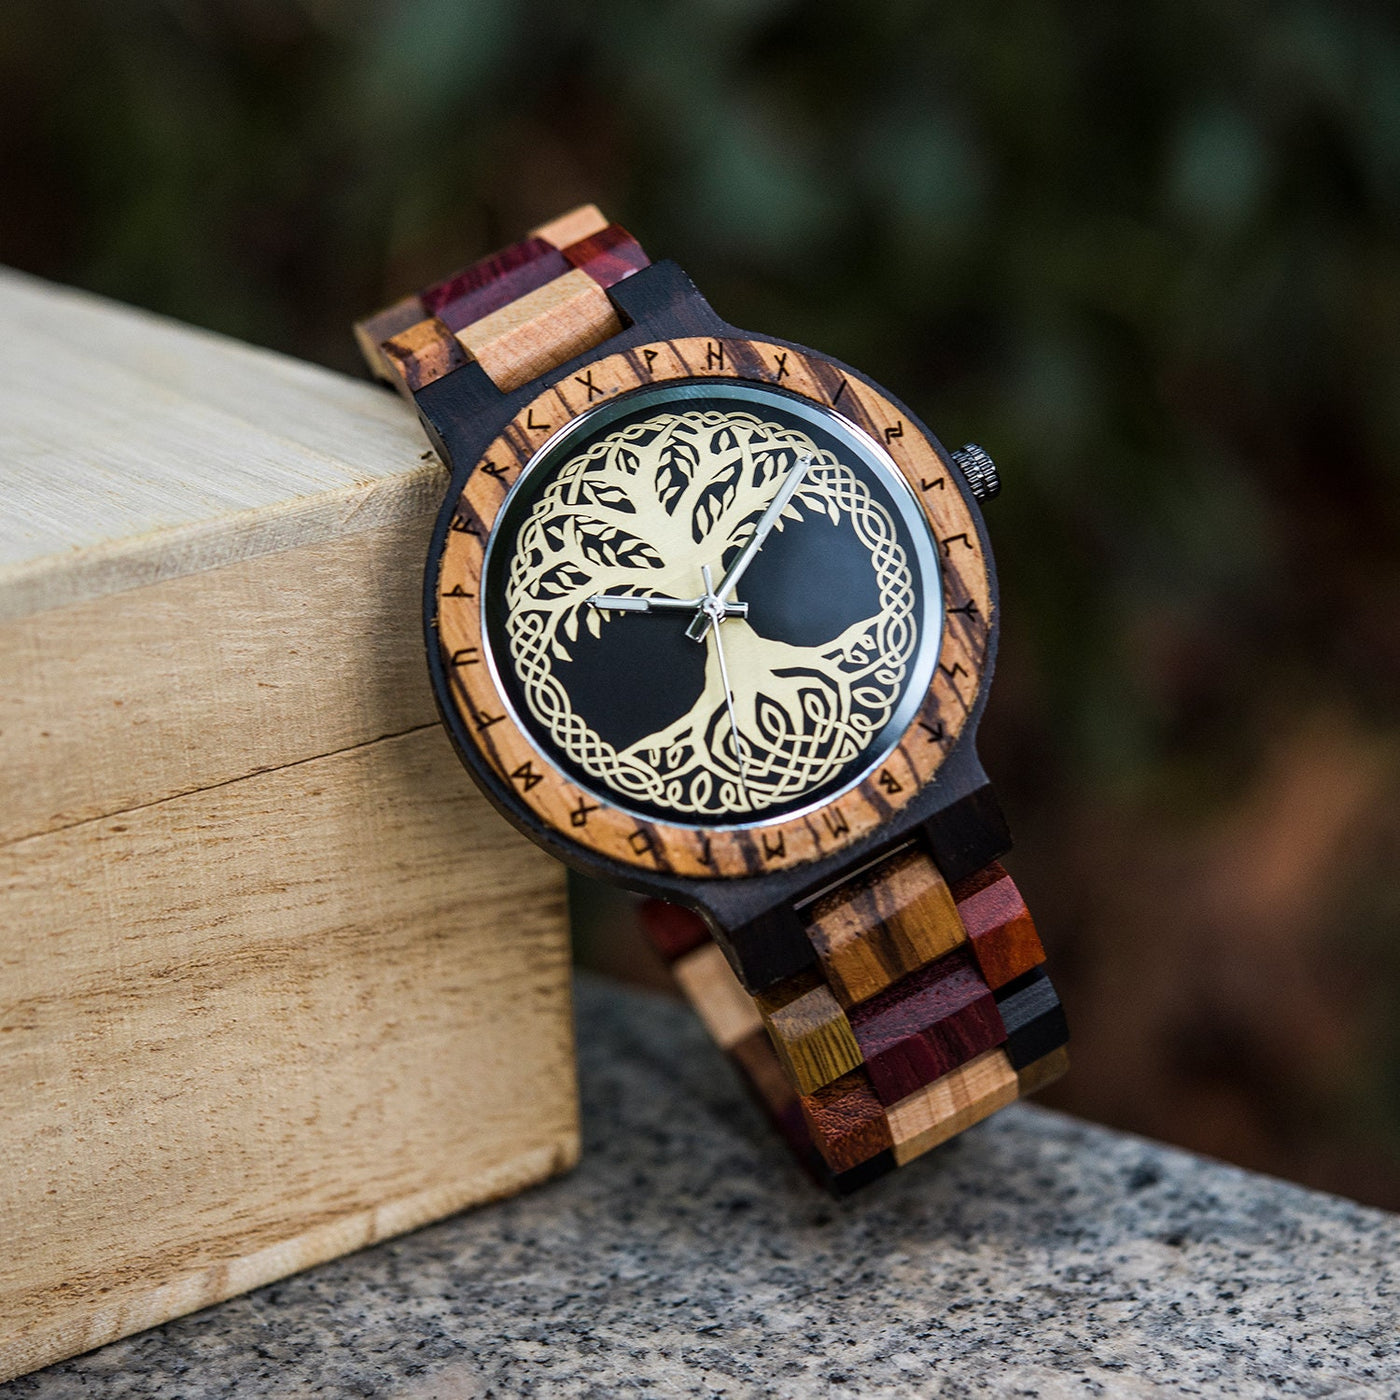 Tree of Life Watch, Engraved Watch | Wooden Watch, watches for men | Personalized anniversary gift for him, birthday gift, wood watch